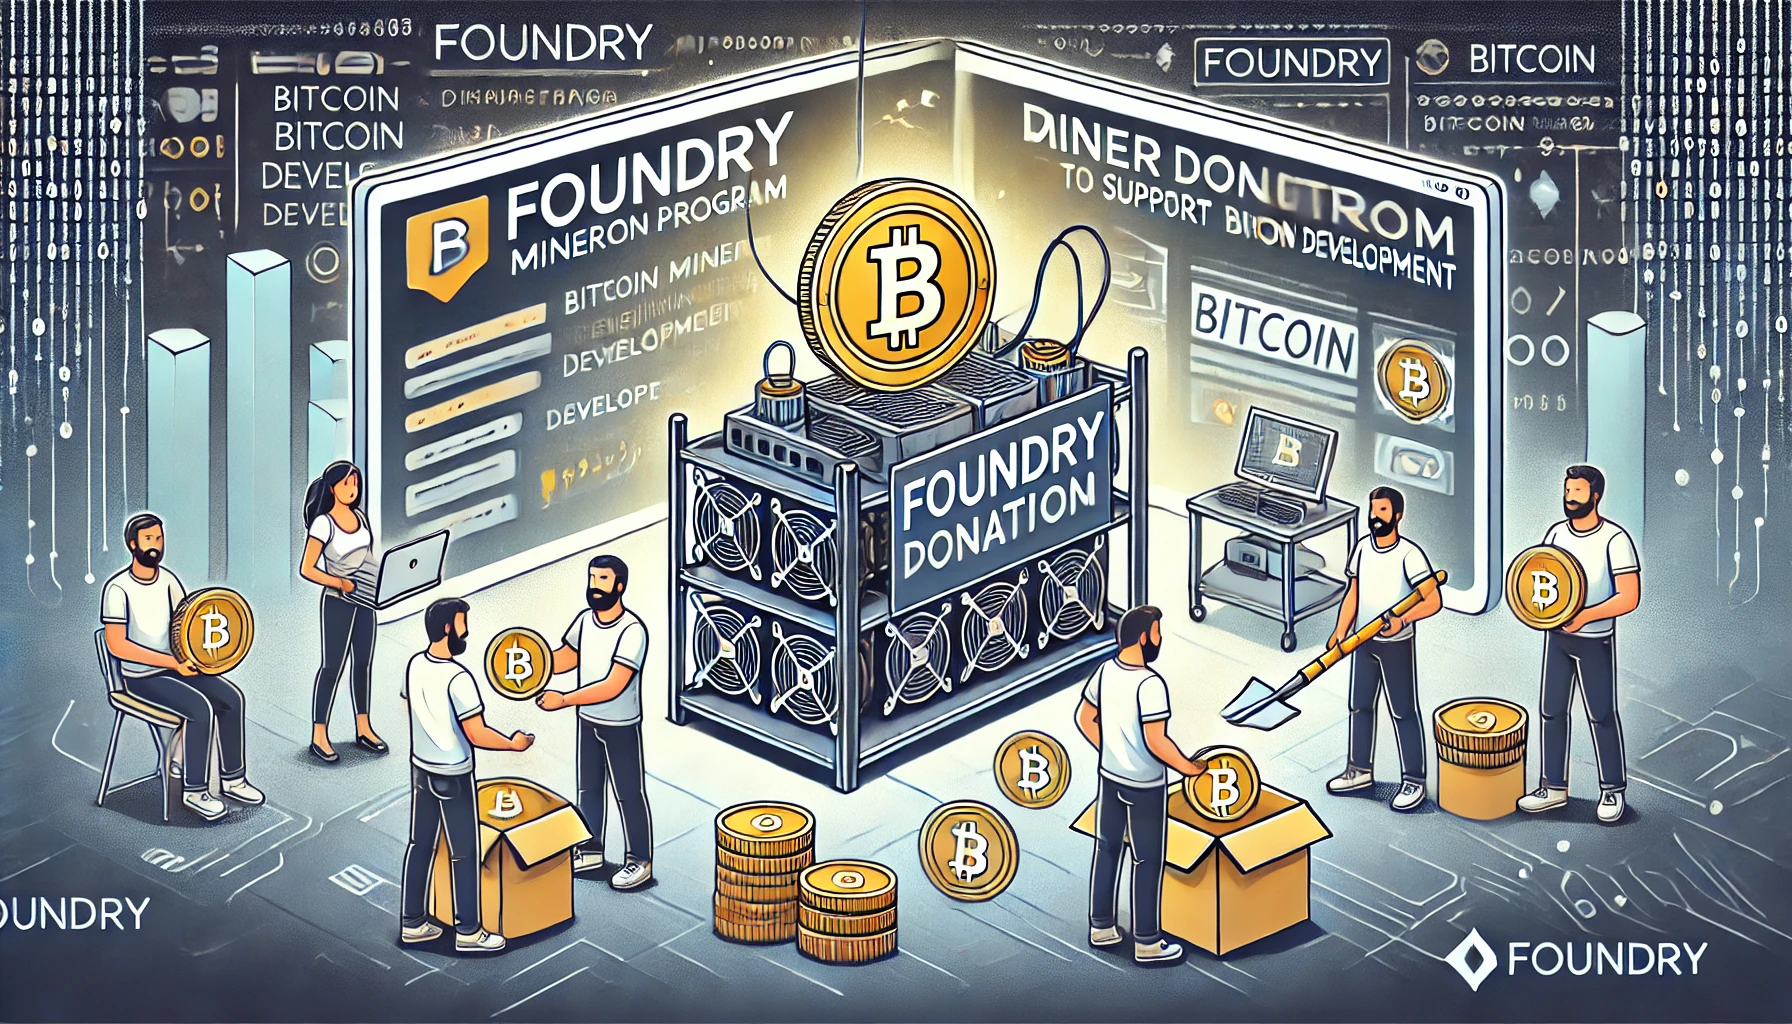 Foundry Launches Miner Donation Program to Support Bitcoin Development